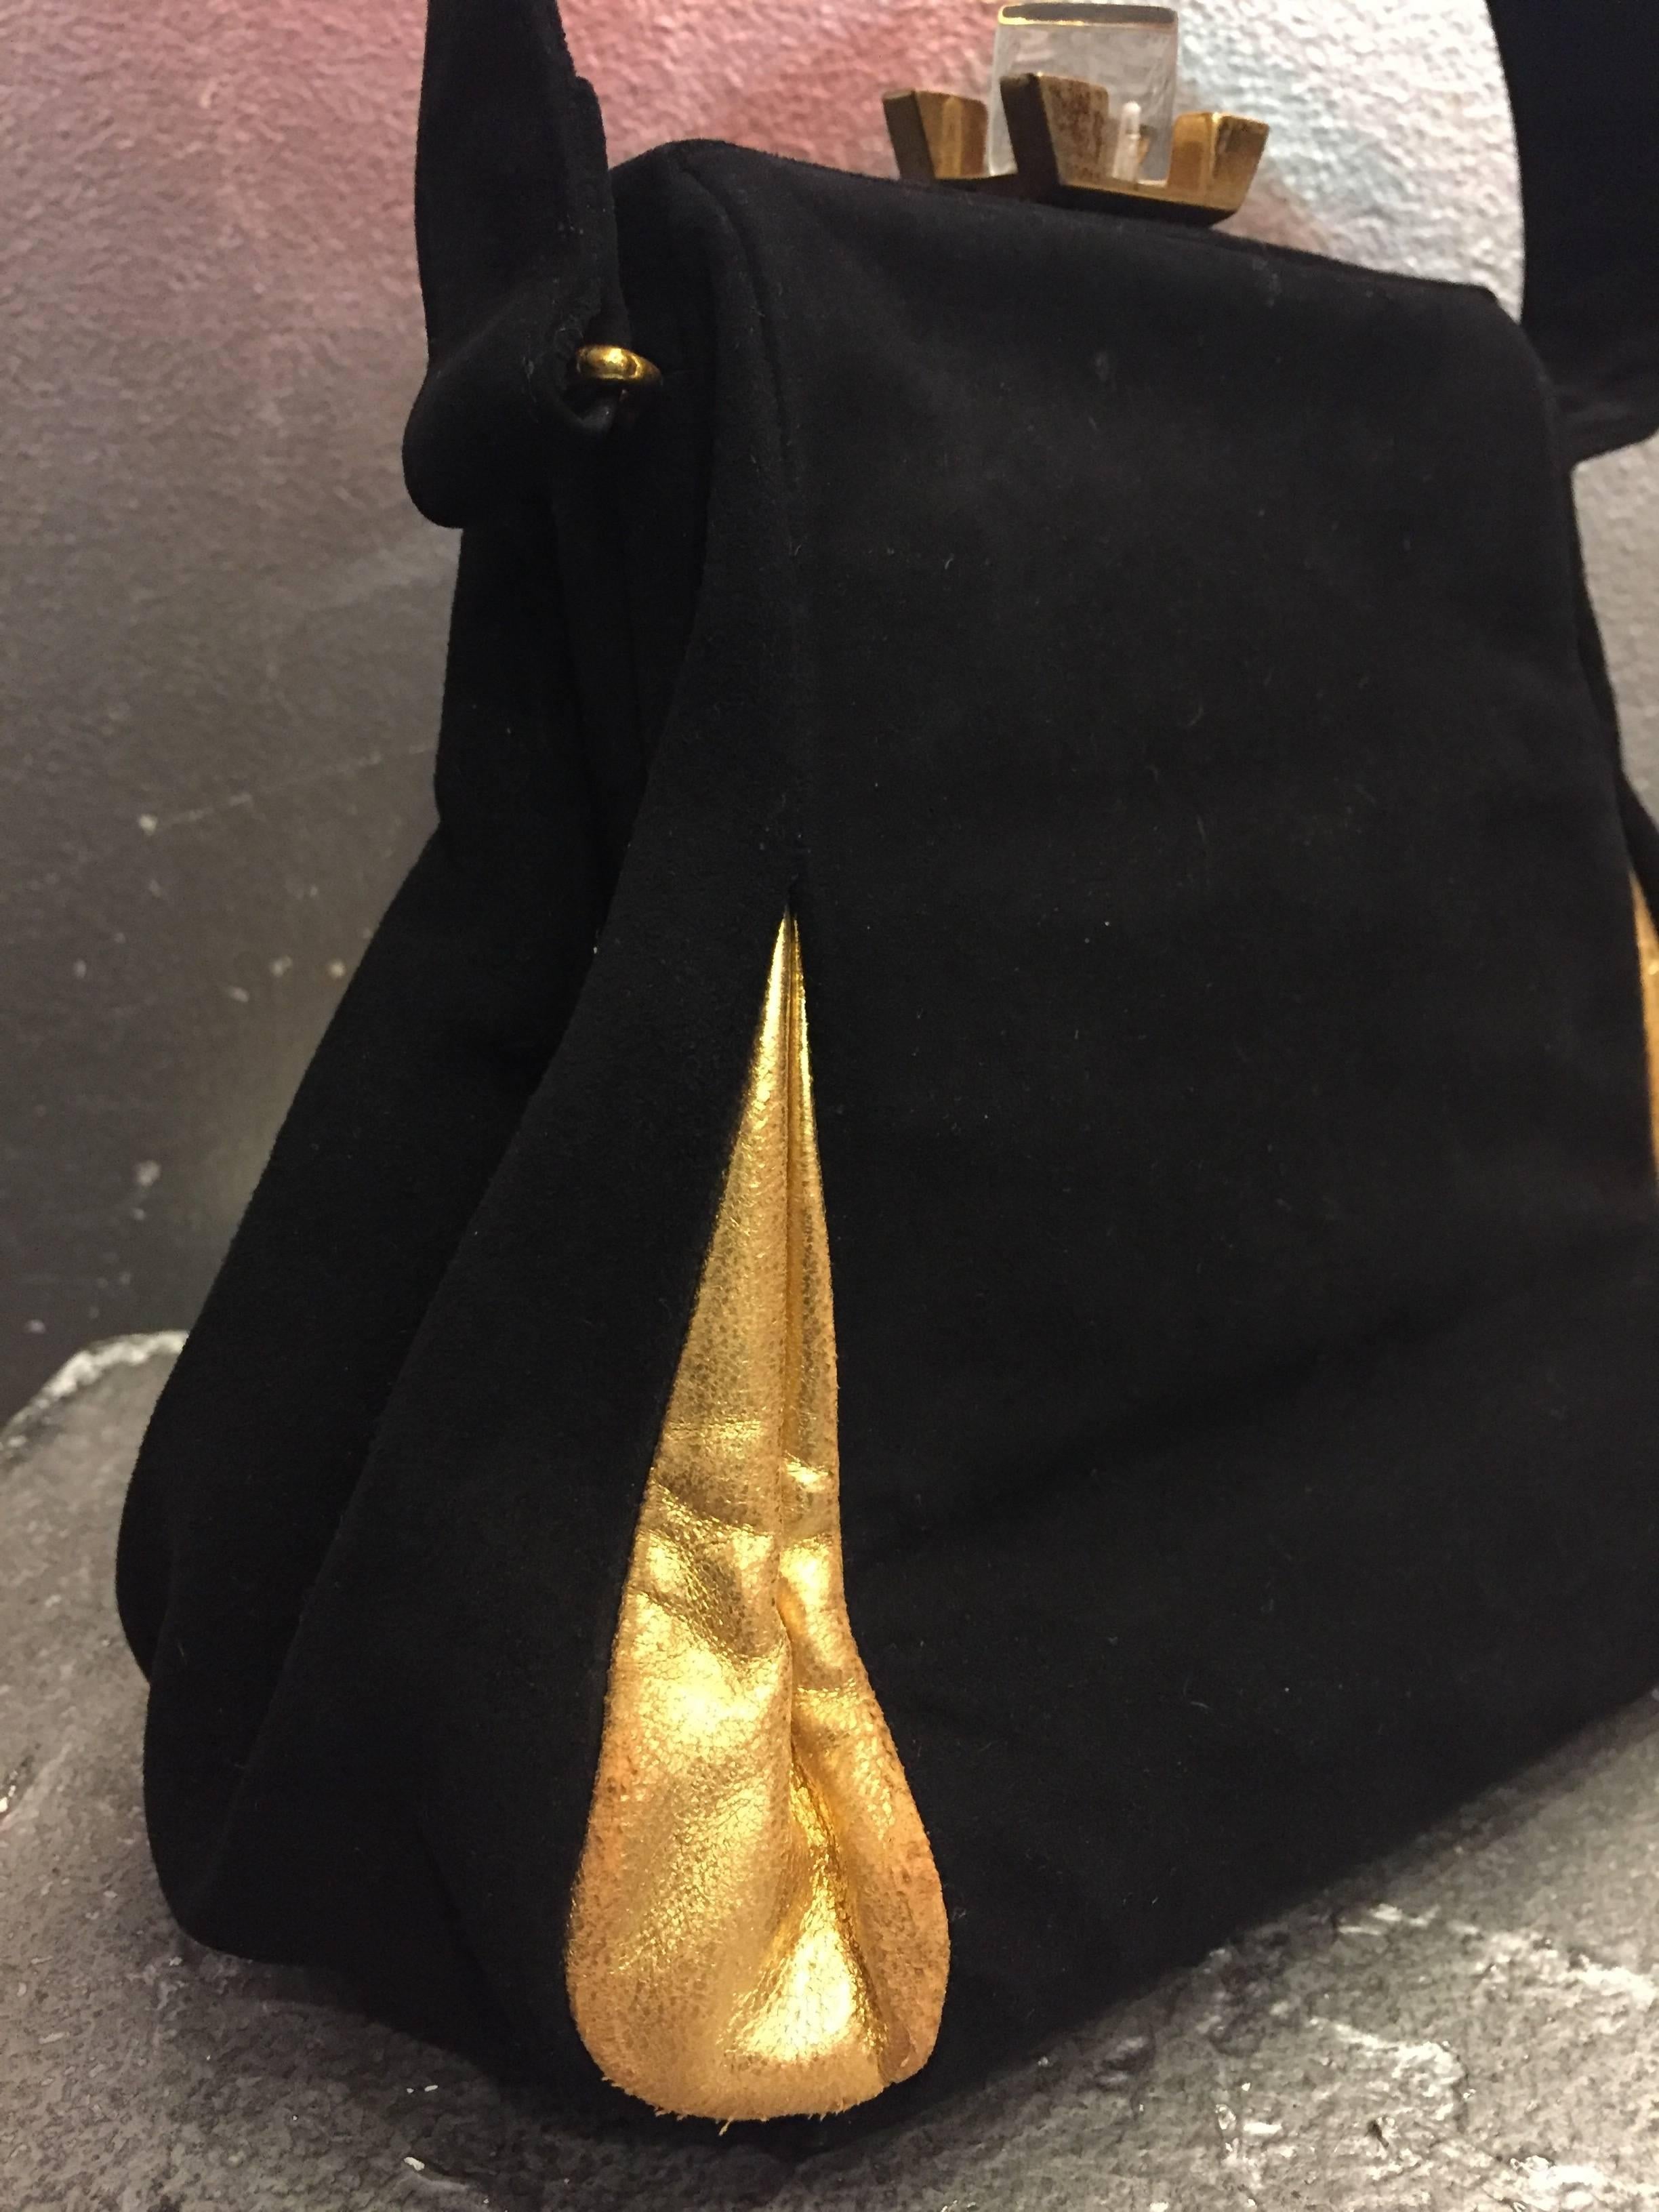 A gorgeous 1940s Theodor black suede and gold gilt leather handbag with lucite and gold-tone clasp and satin lining.  Original coin purse. 